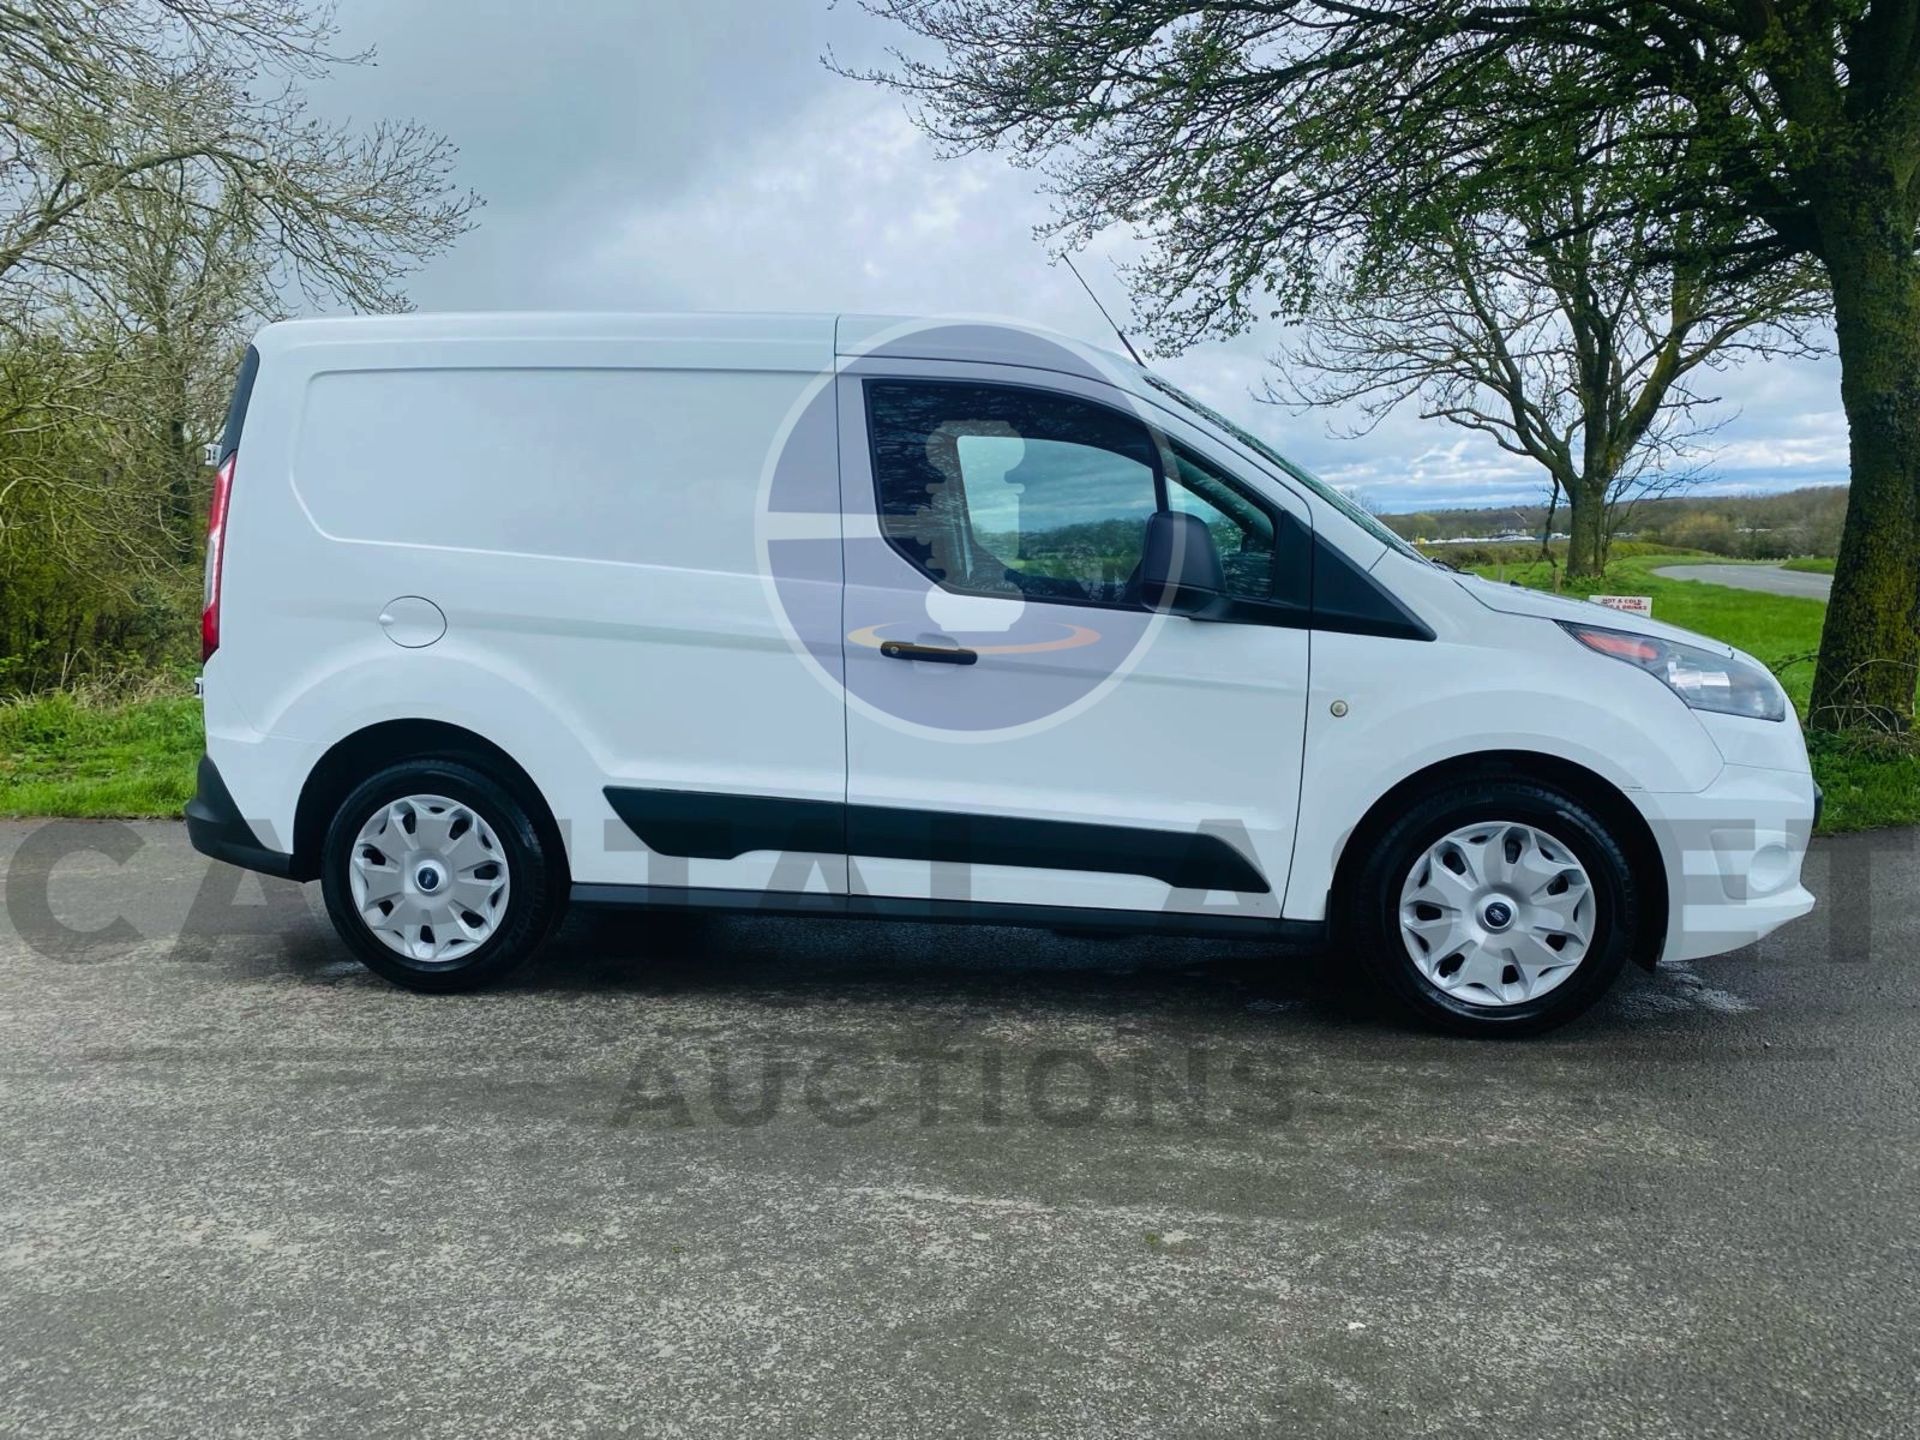 (ON SALE) FORD TRANSIT CONNECT *TREND EDITION* SWB PANEL VAN (2017 - EURO 6) 1.5 TDCI - Image 7 of 24